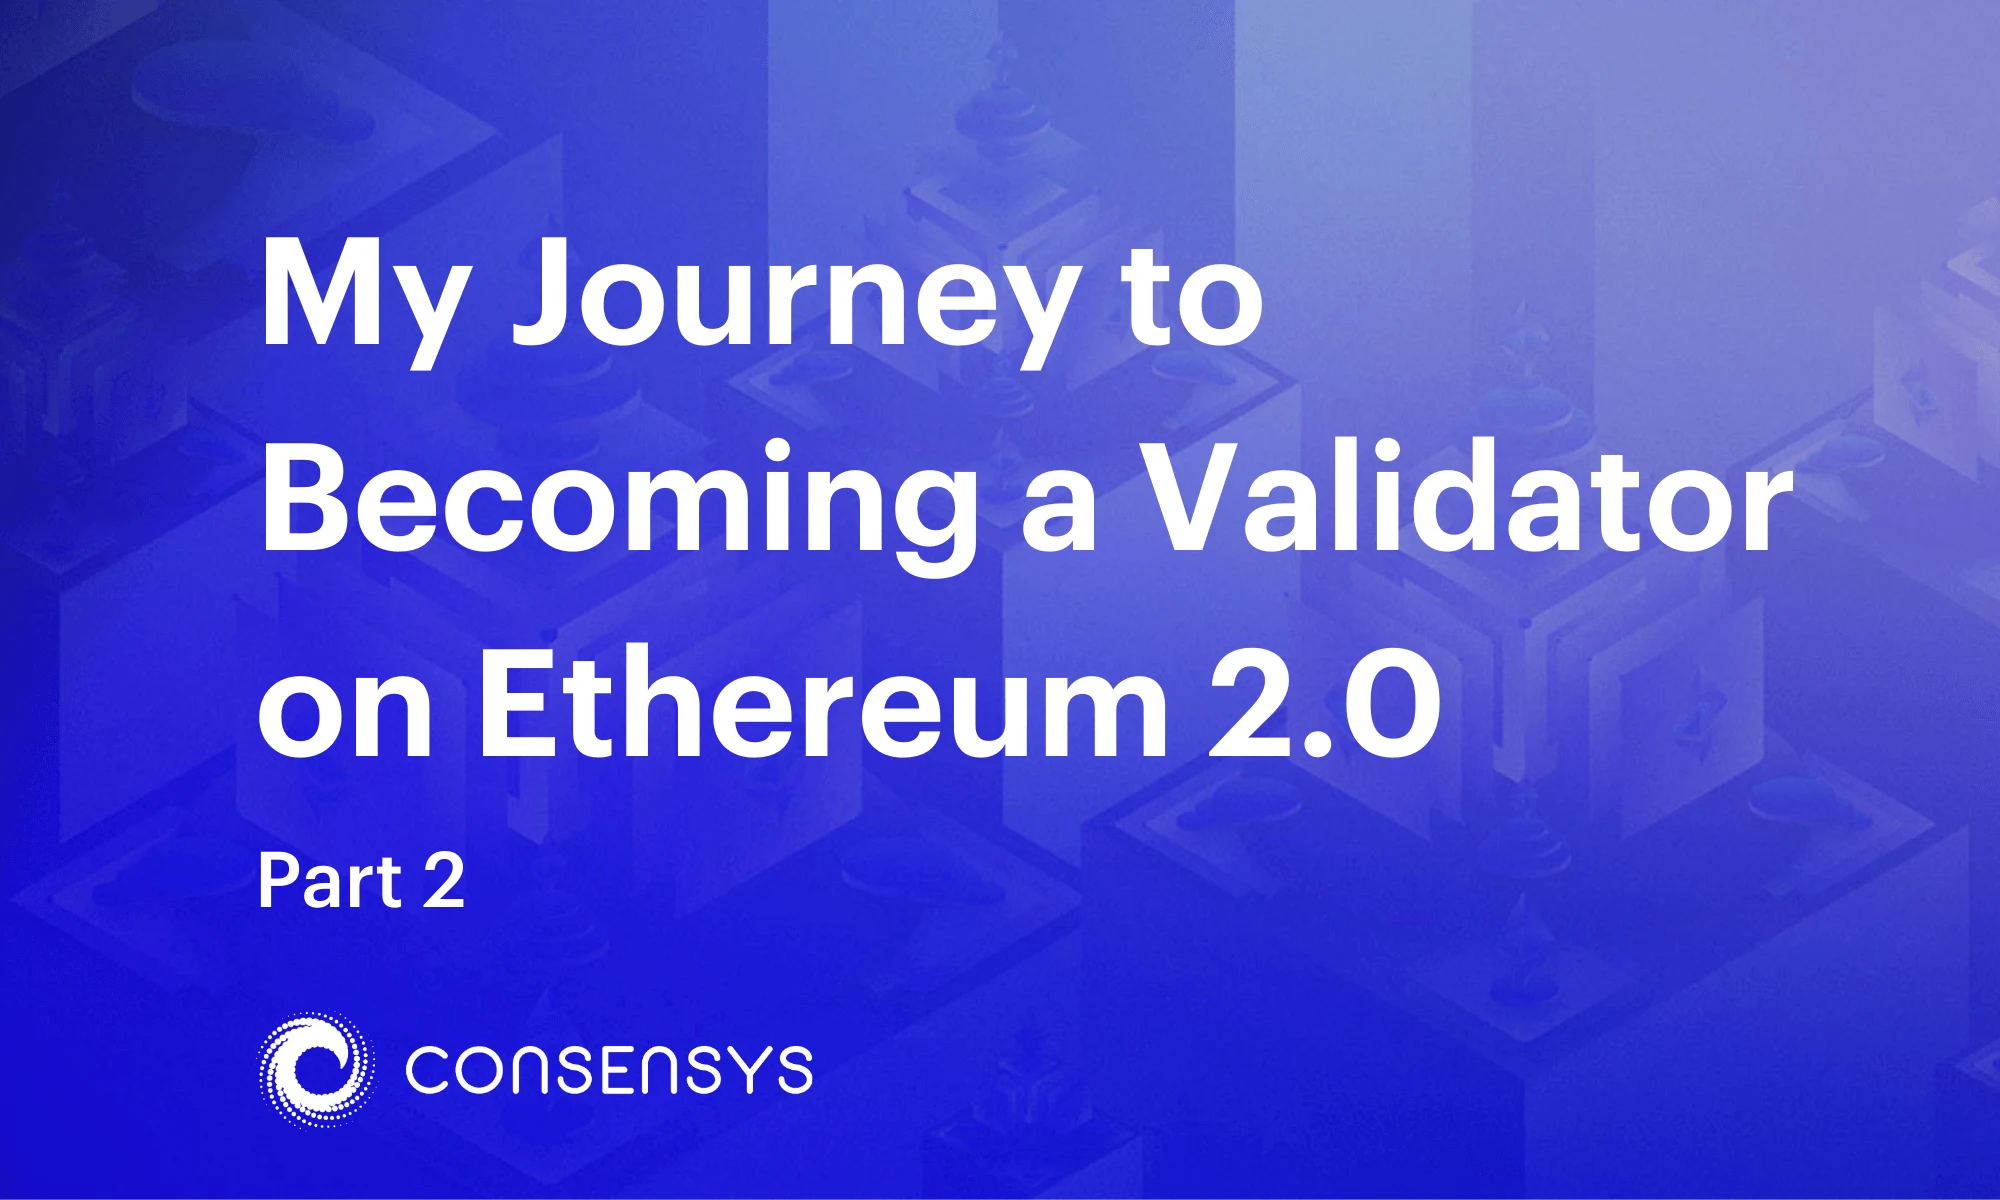 Image: My Journey to Becoming a Validator on Ethereum 2.0, Part 2